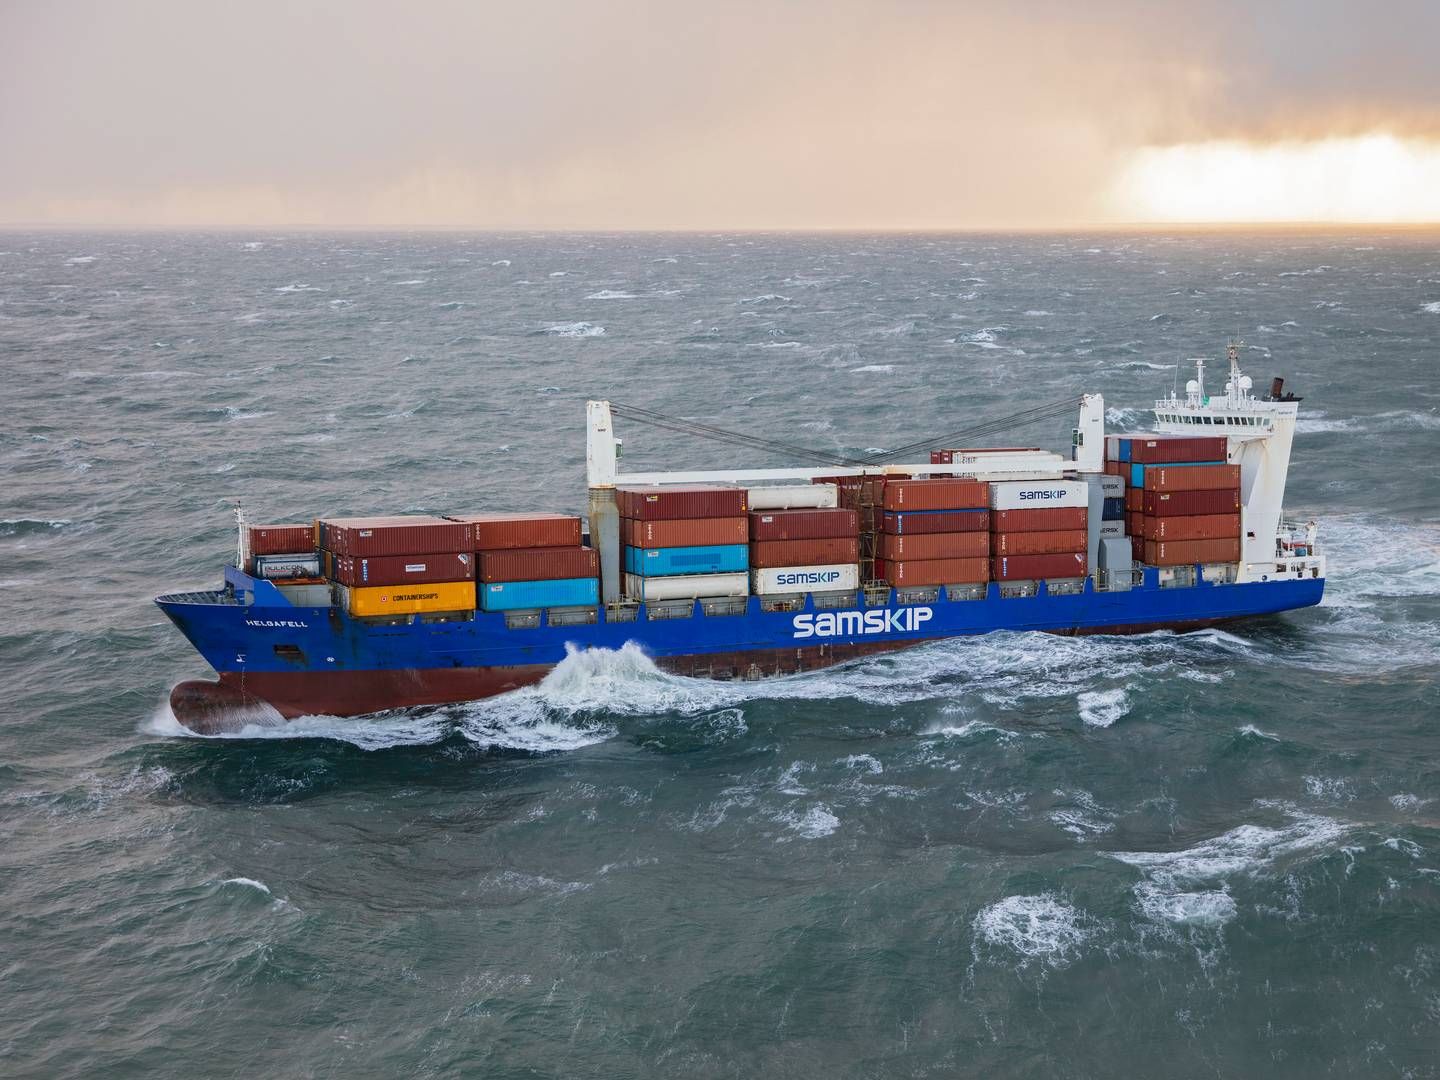 Samskip plans to deploy two new zero-emission container ships in an upcoming green corridor between Rotterdam and Oslo. | Photo: Pr / Samskip